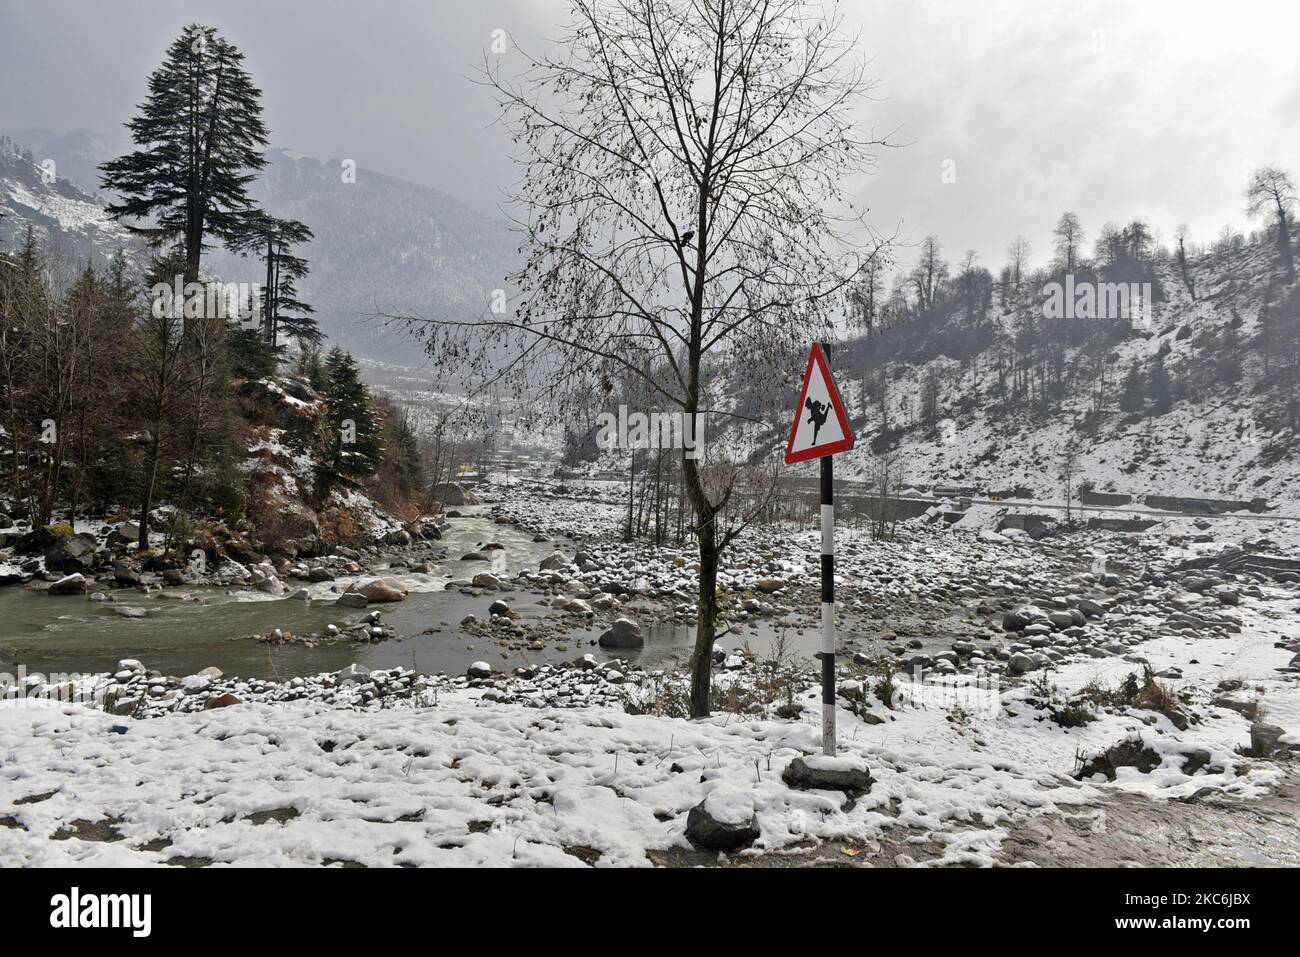 Snowfall in Himachal Pradesh, India, 28 December, 2020. Several roads in Manali and Shimla were blocked due to heavy snowfall. Kufri in Shimla district witnessed 30 cm of snowfall, followed by 32 cm in Dalhousie of Chamba district, 14 cm in Manali of Kullu district and nine cm in Shimla city, according to the Meteorological department, Shimla. (Photo by Indranil Aditya/NurPhoto) Stock Photo